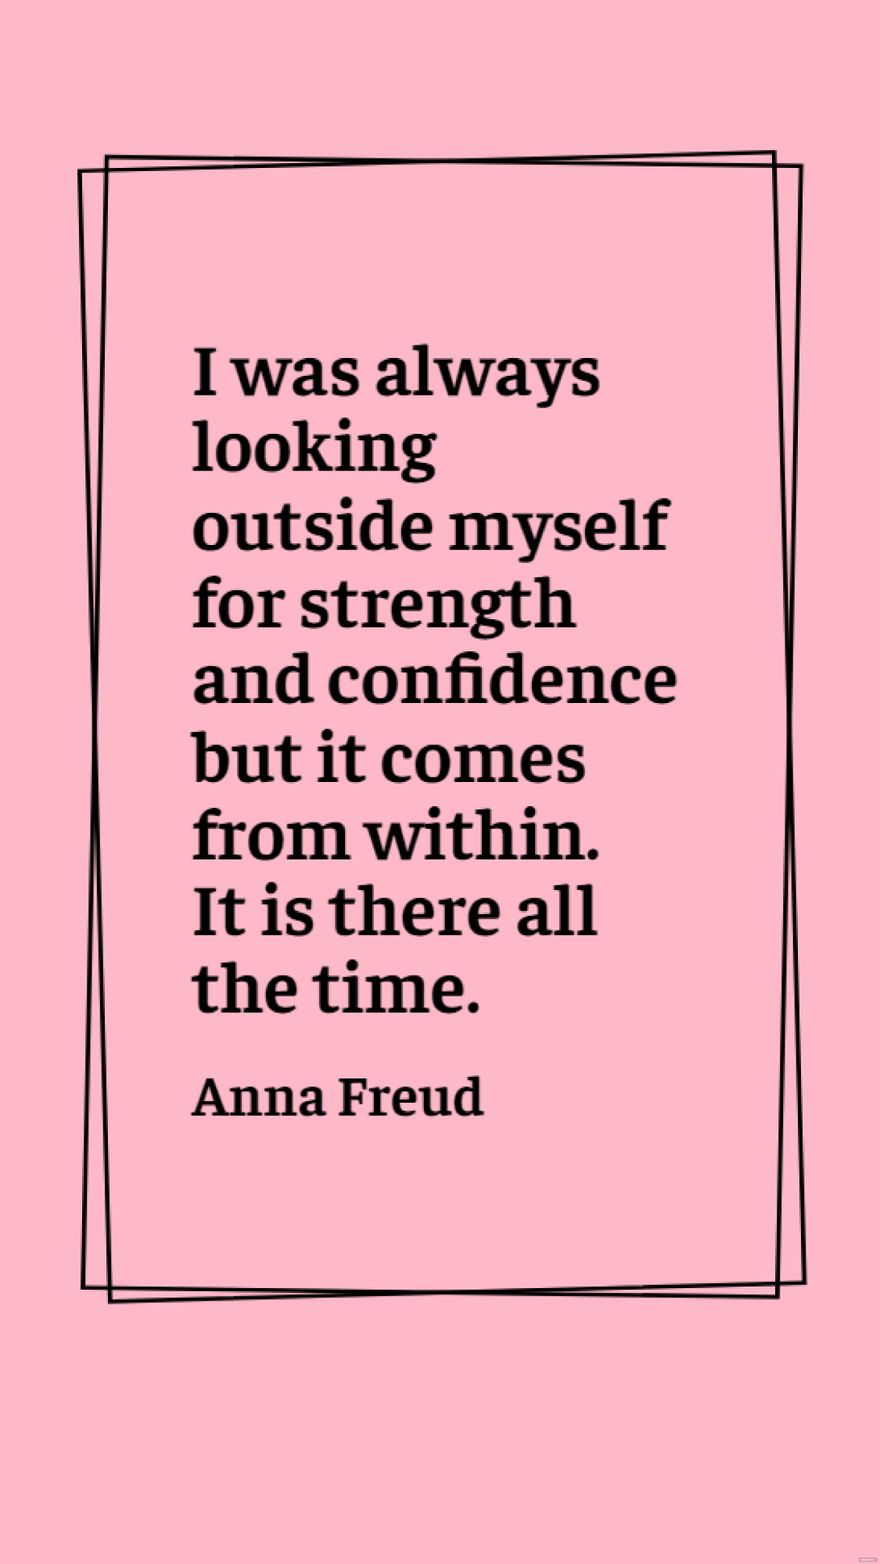 Free Anna Freud - I was always looking outside myself for strength and confidence but it comes from within. It is there all the time. in JPG